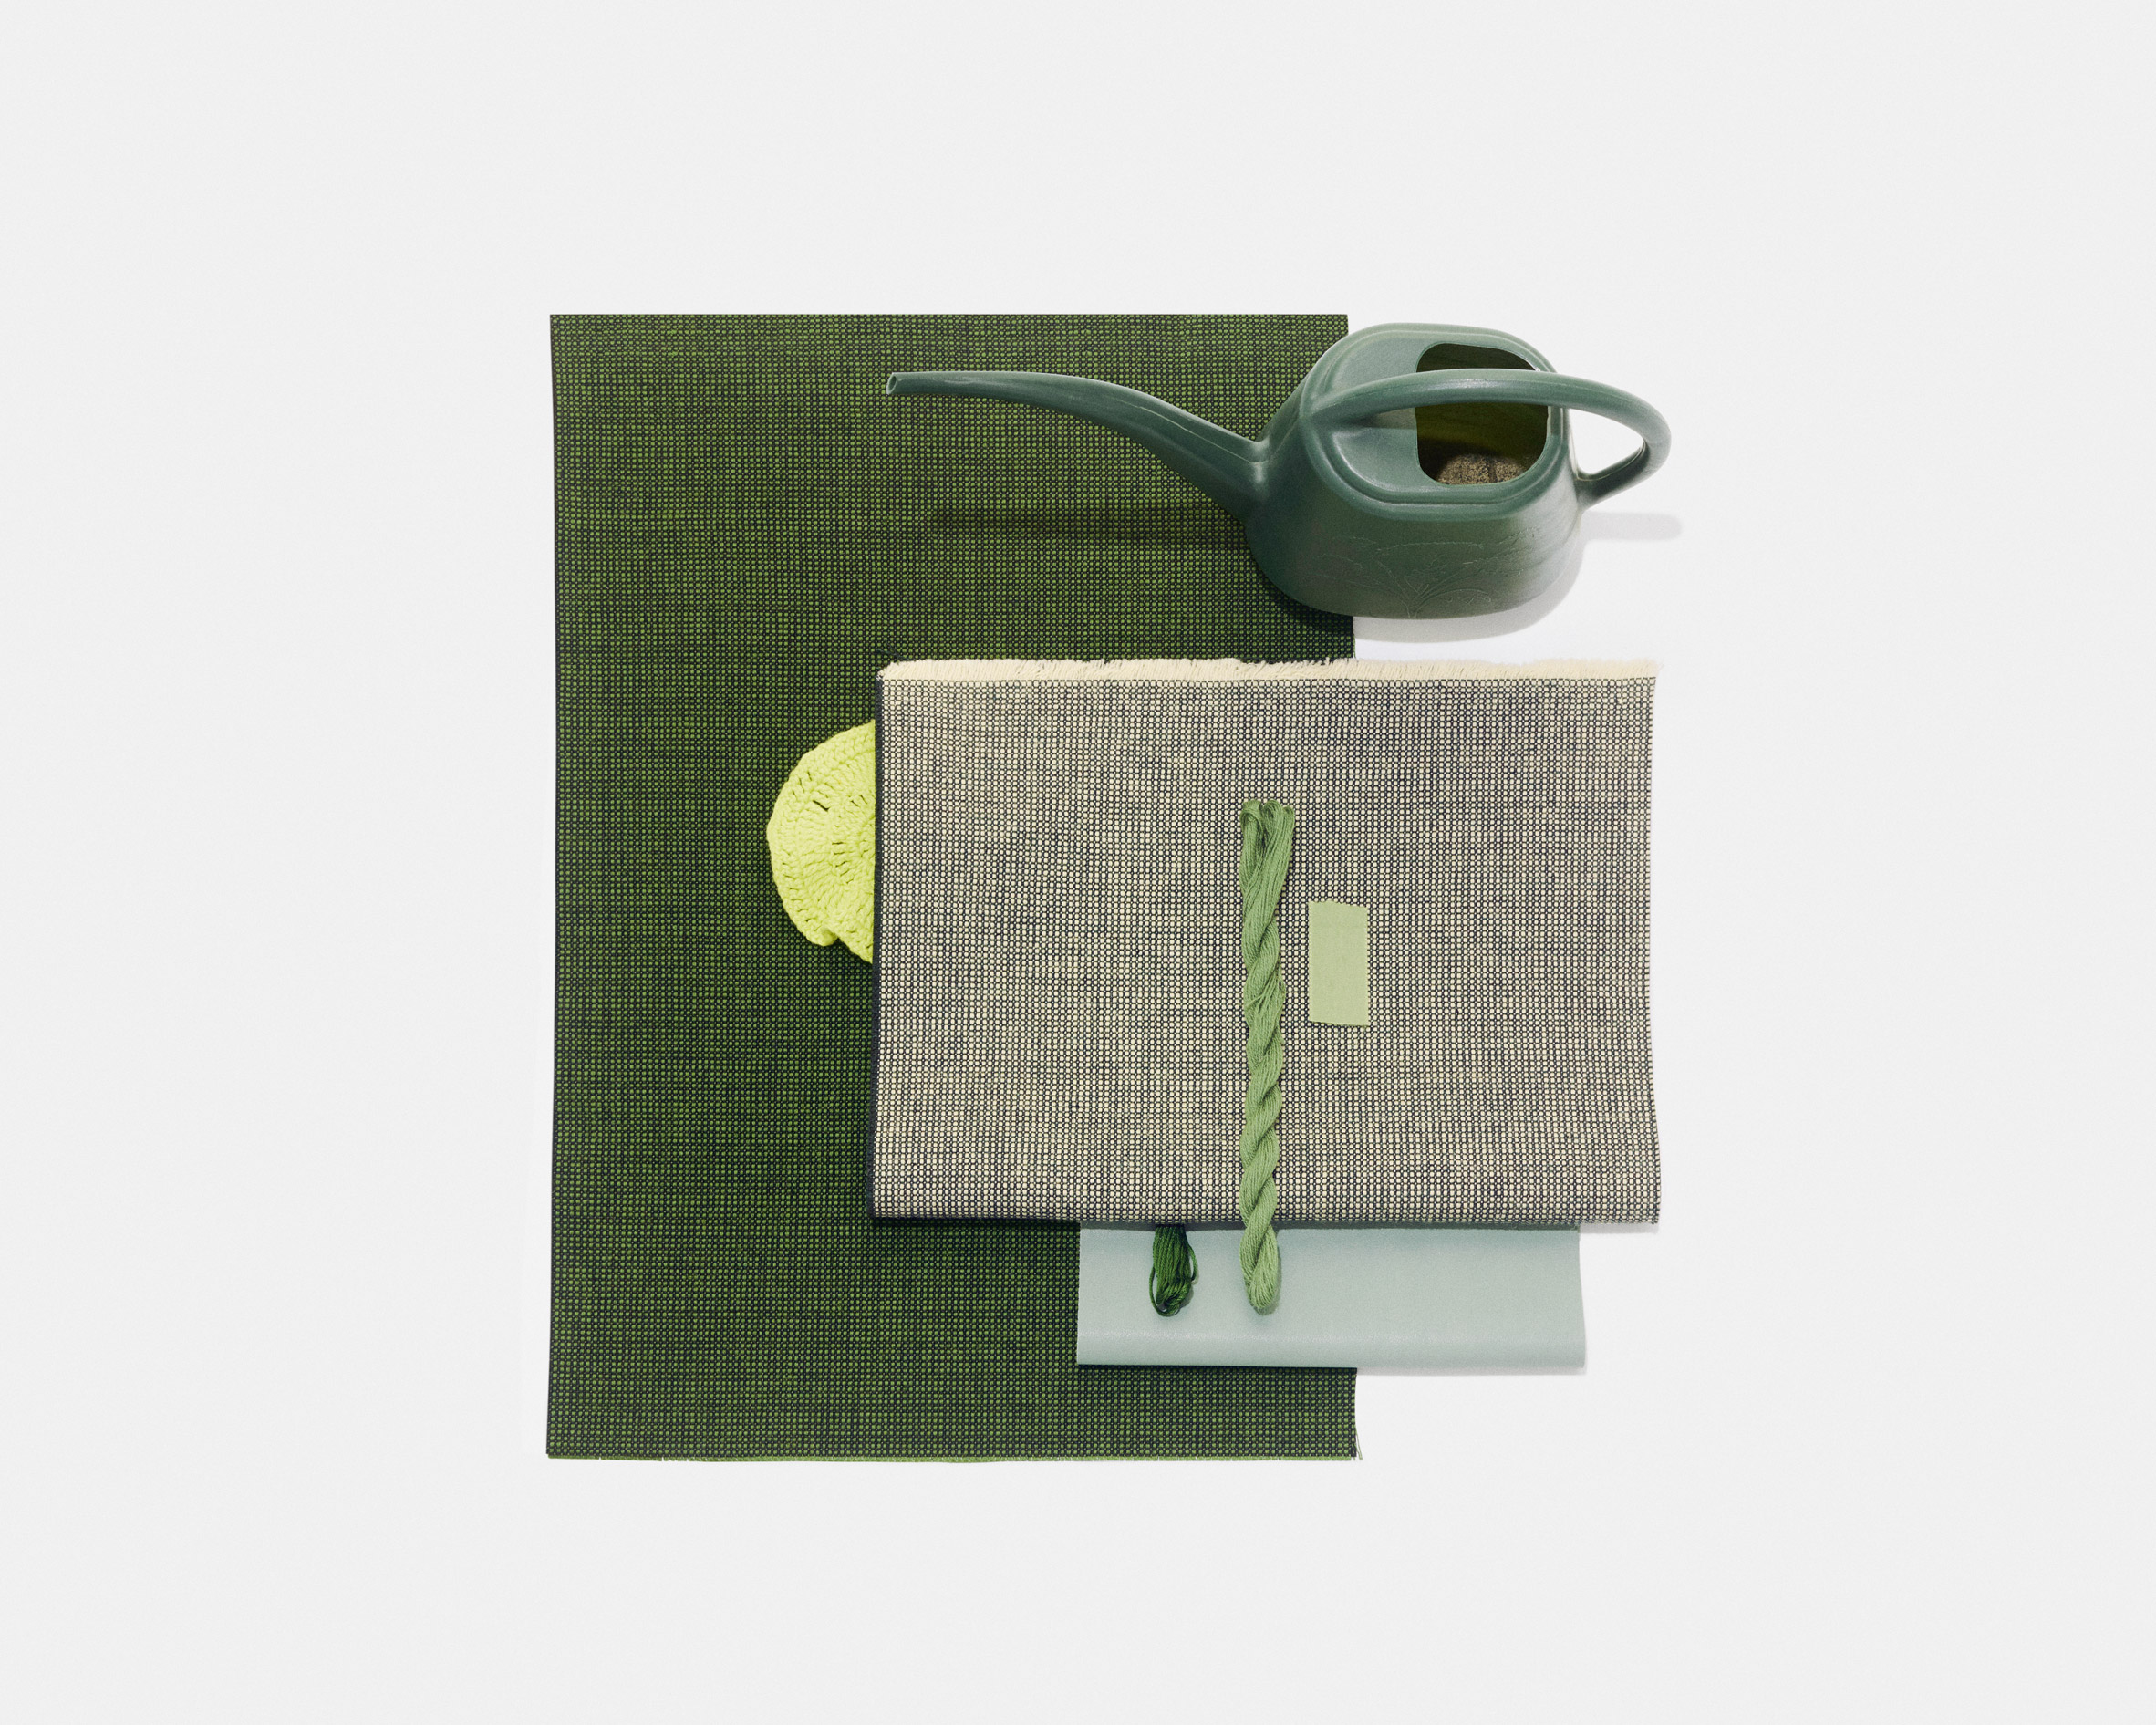 Swatches of Kvadrat's Sabi textile upholstery in a vivid, forest green and light green colour